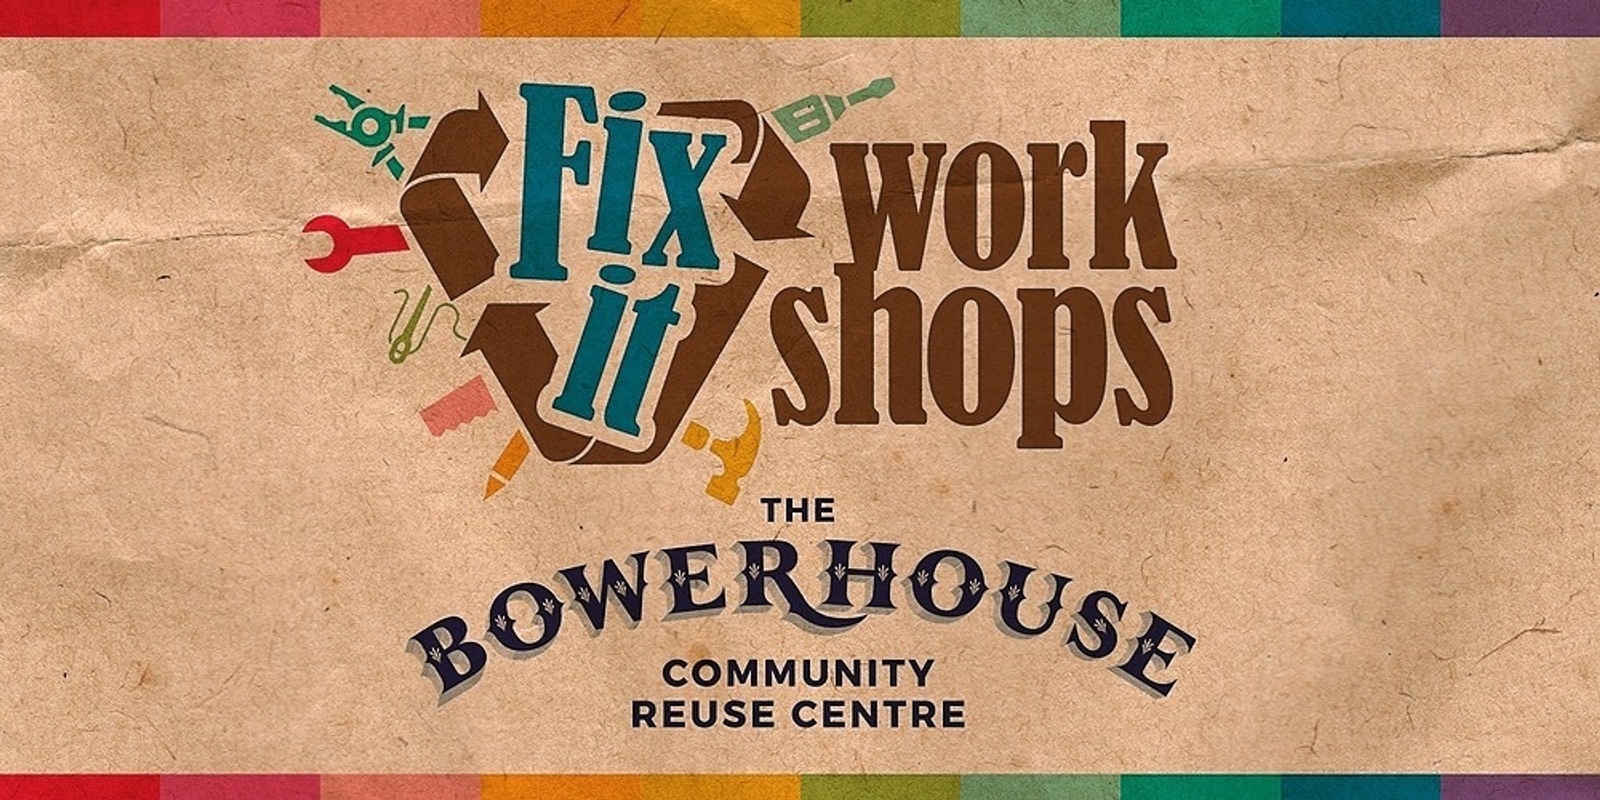 Banner image for Native Bee Hotel Workshop - The Bowerhouse Community Reuse Centre